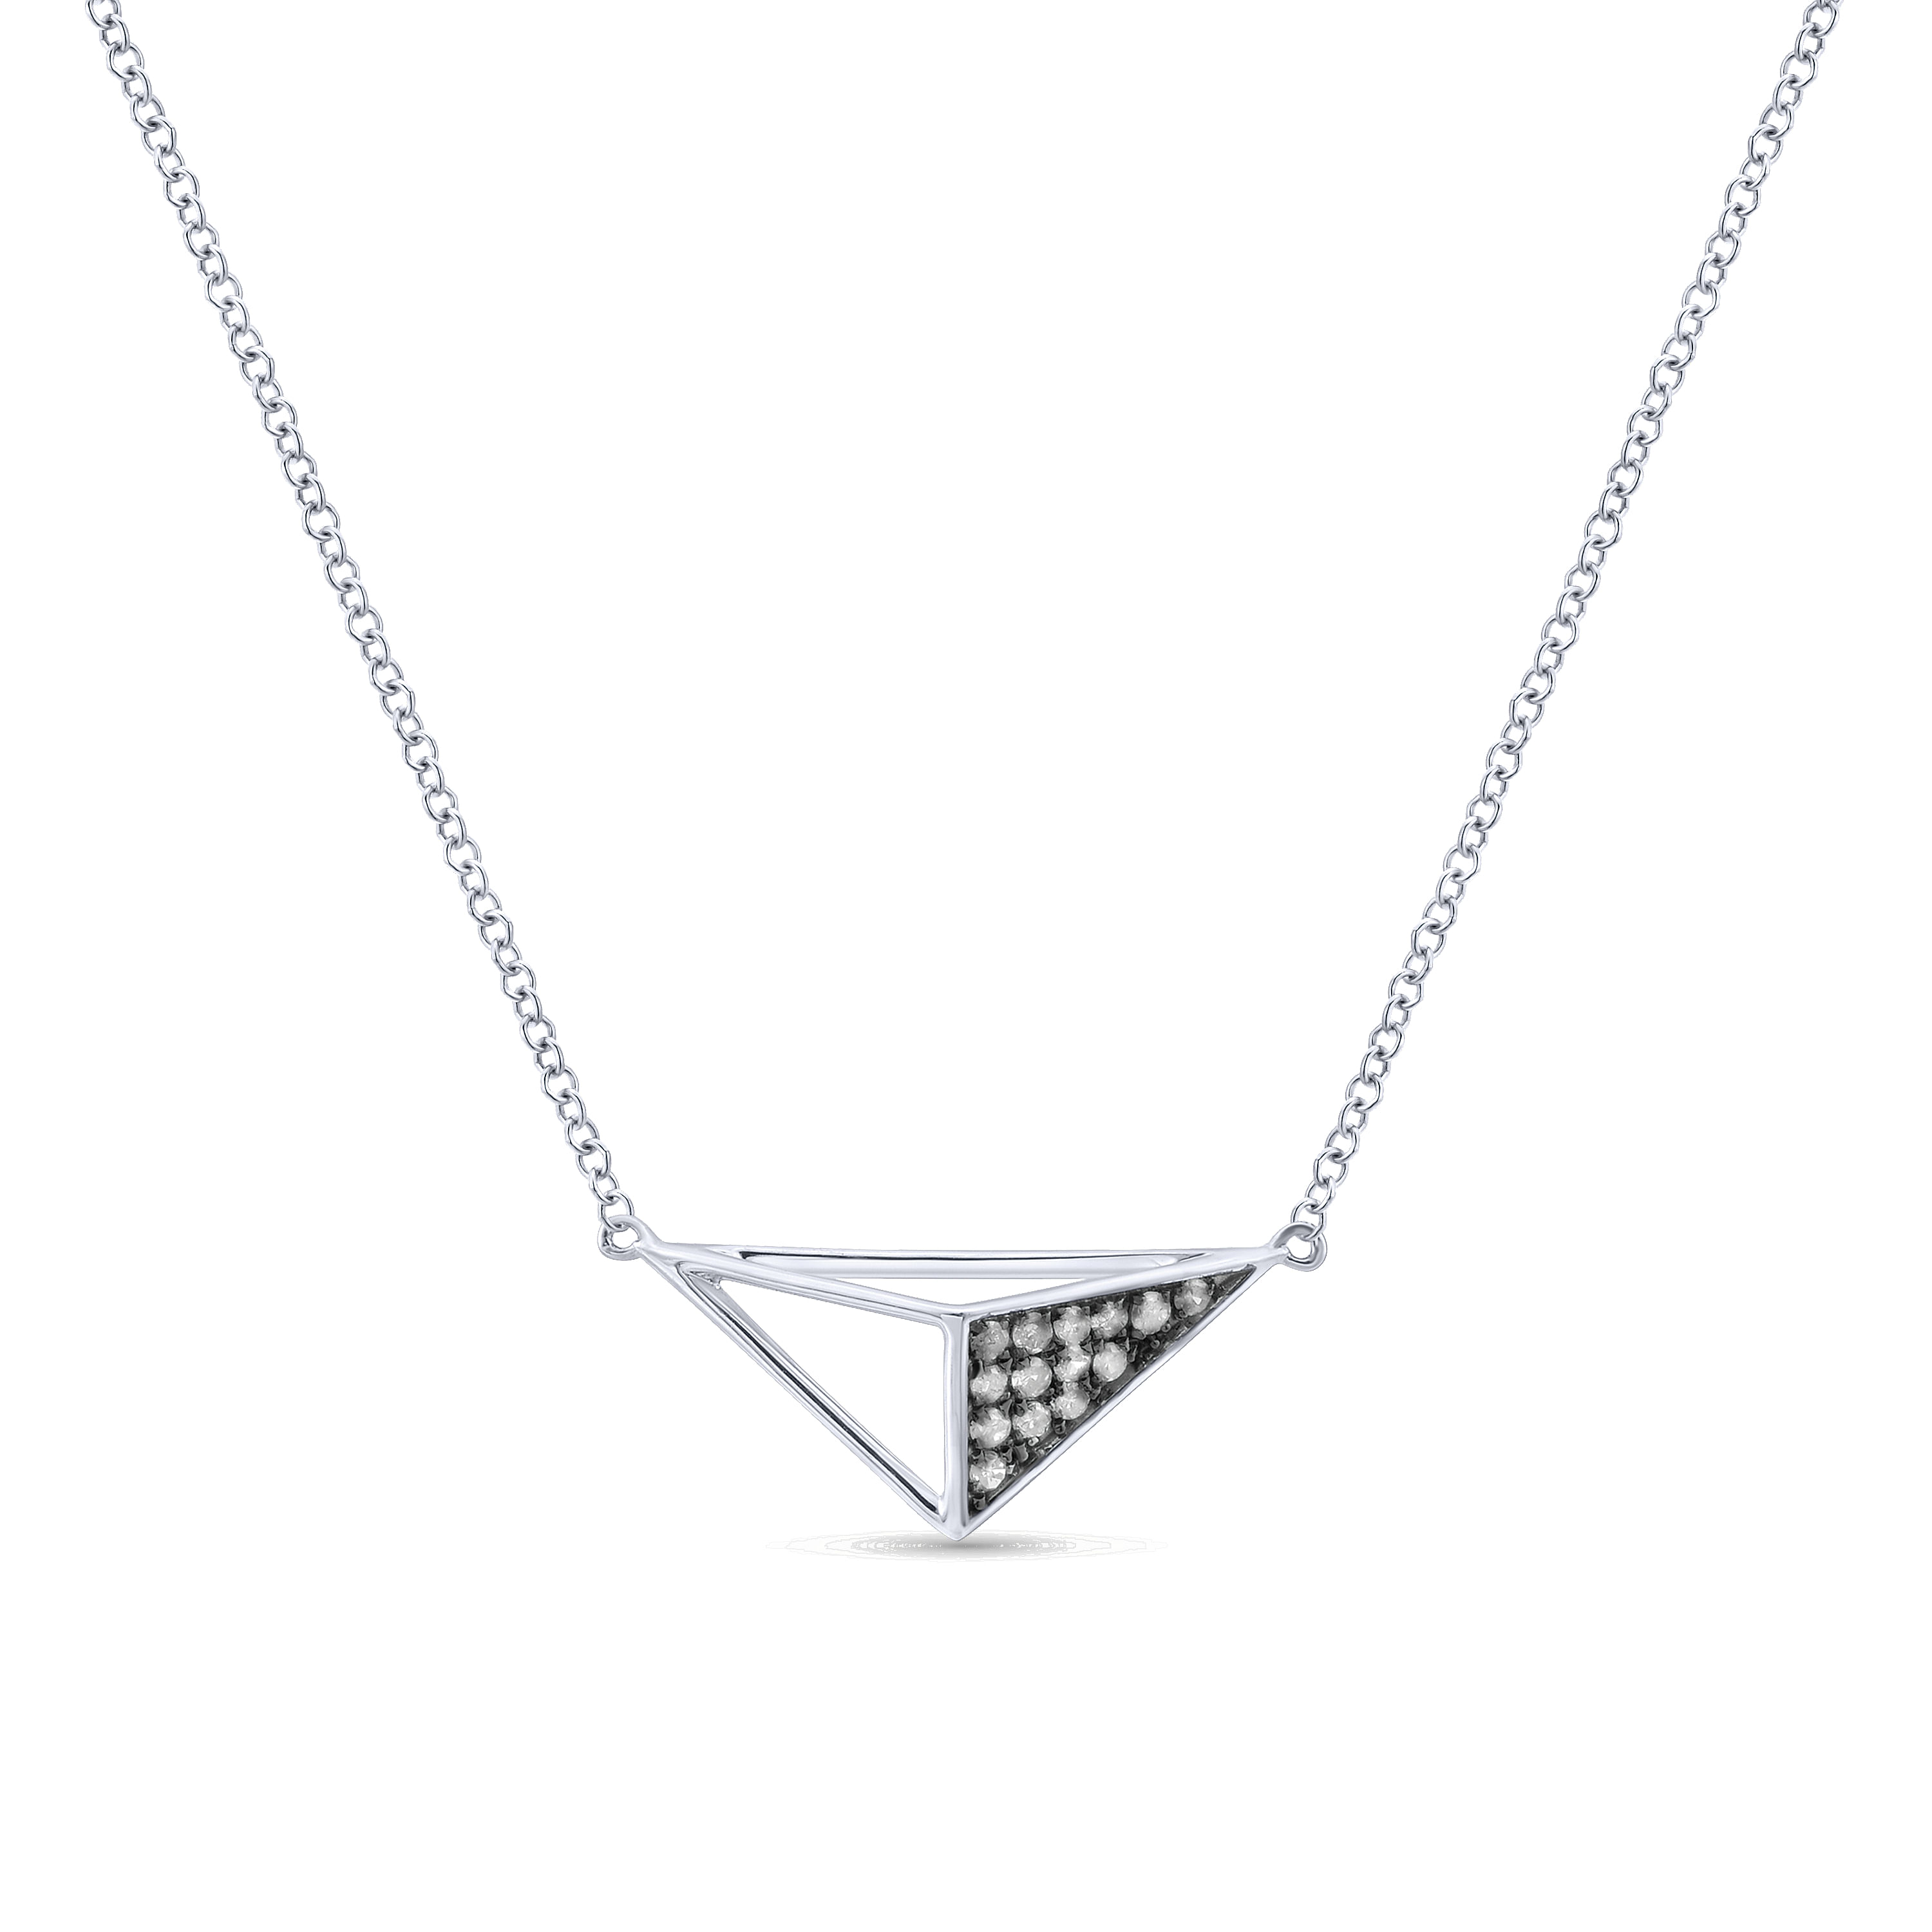 925 Sterling Silver Geometric Pendant Necklace with Diamonds